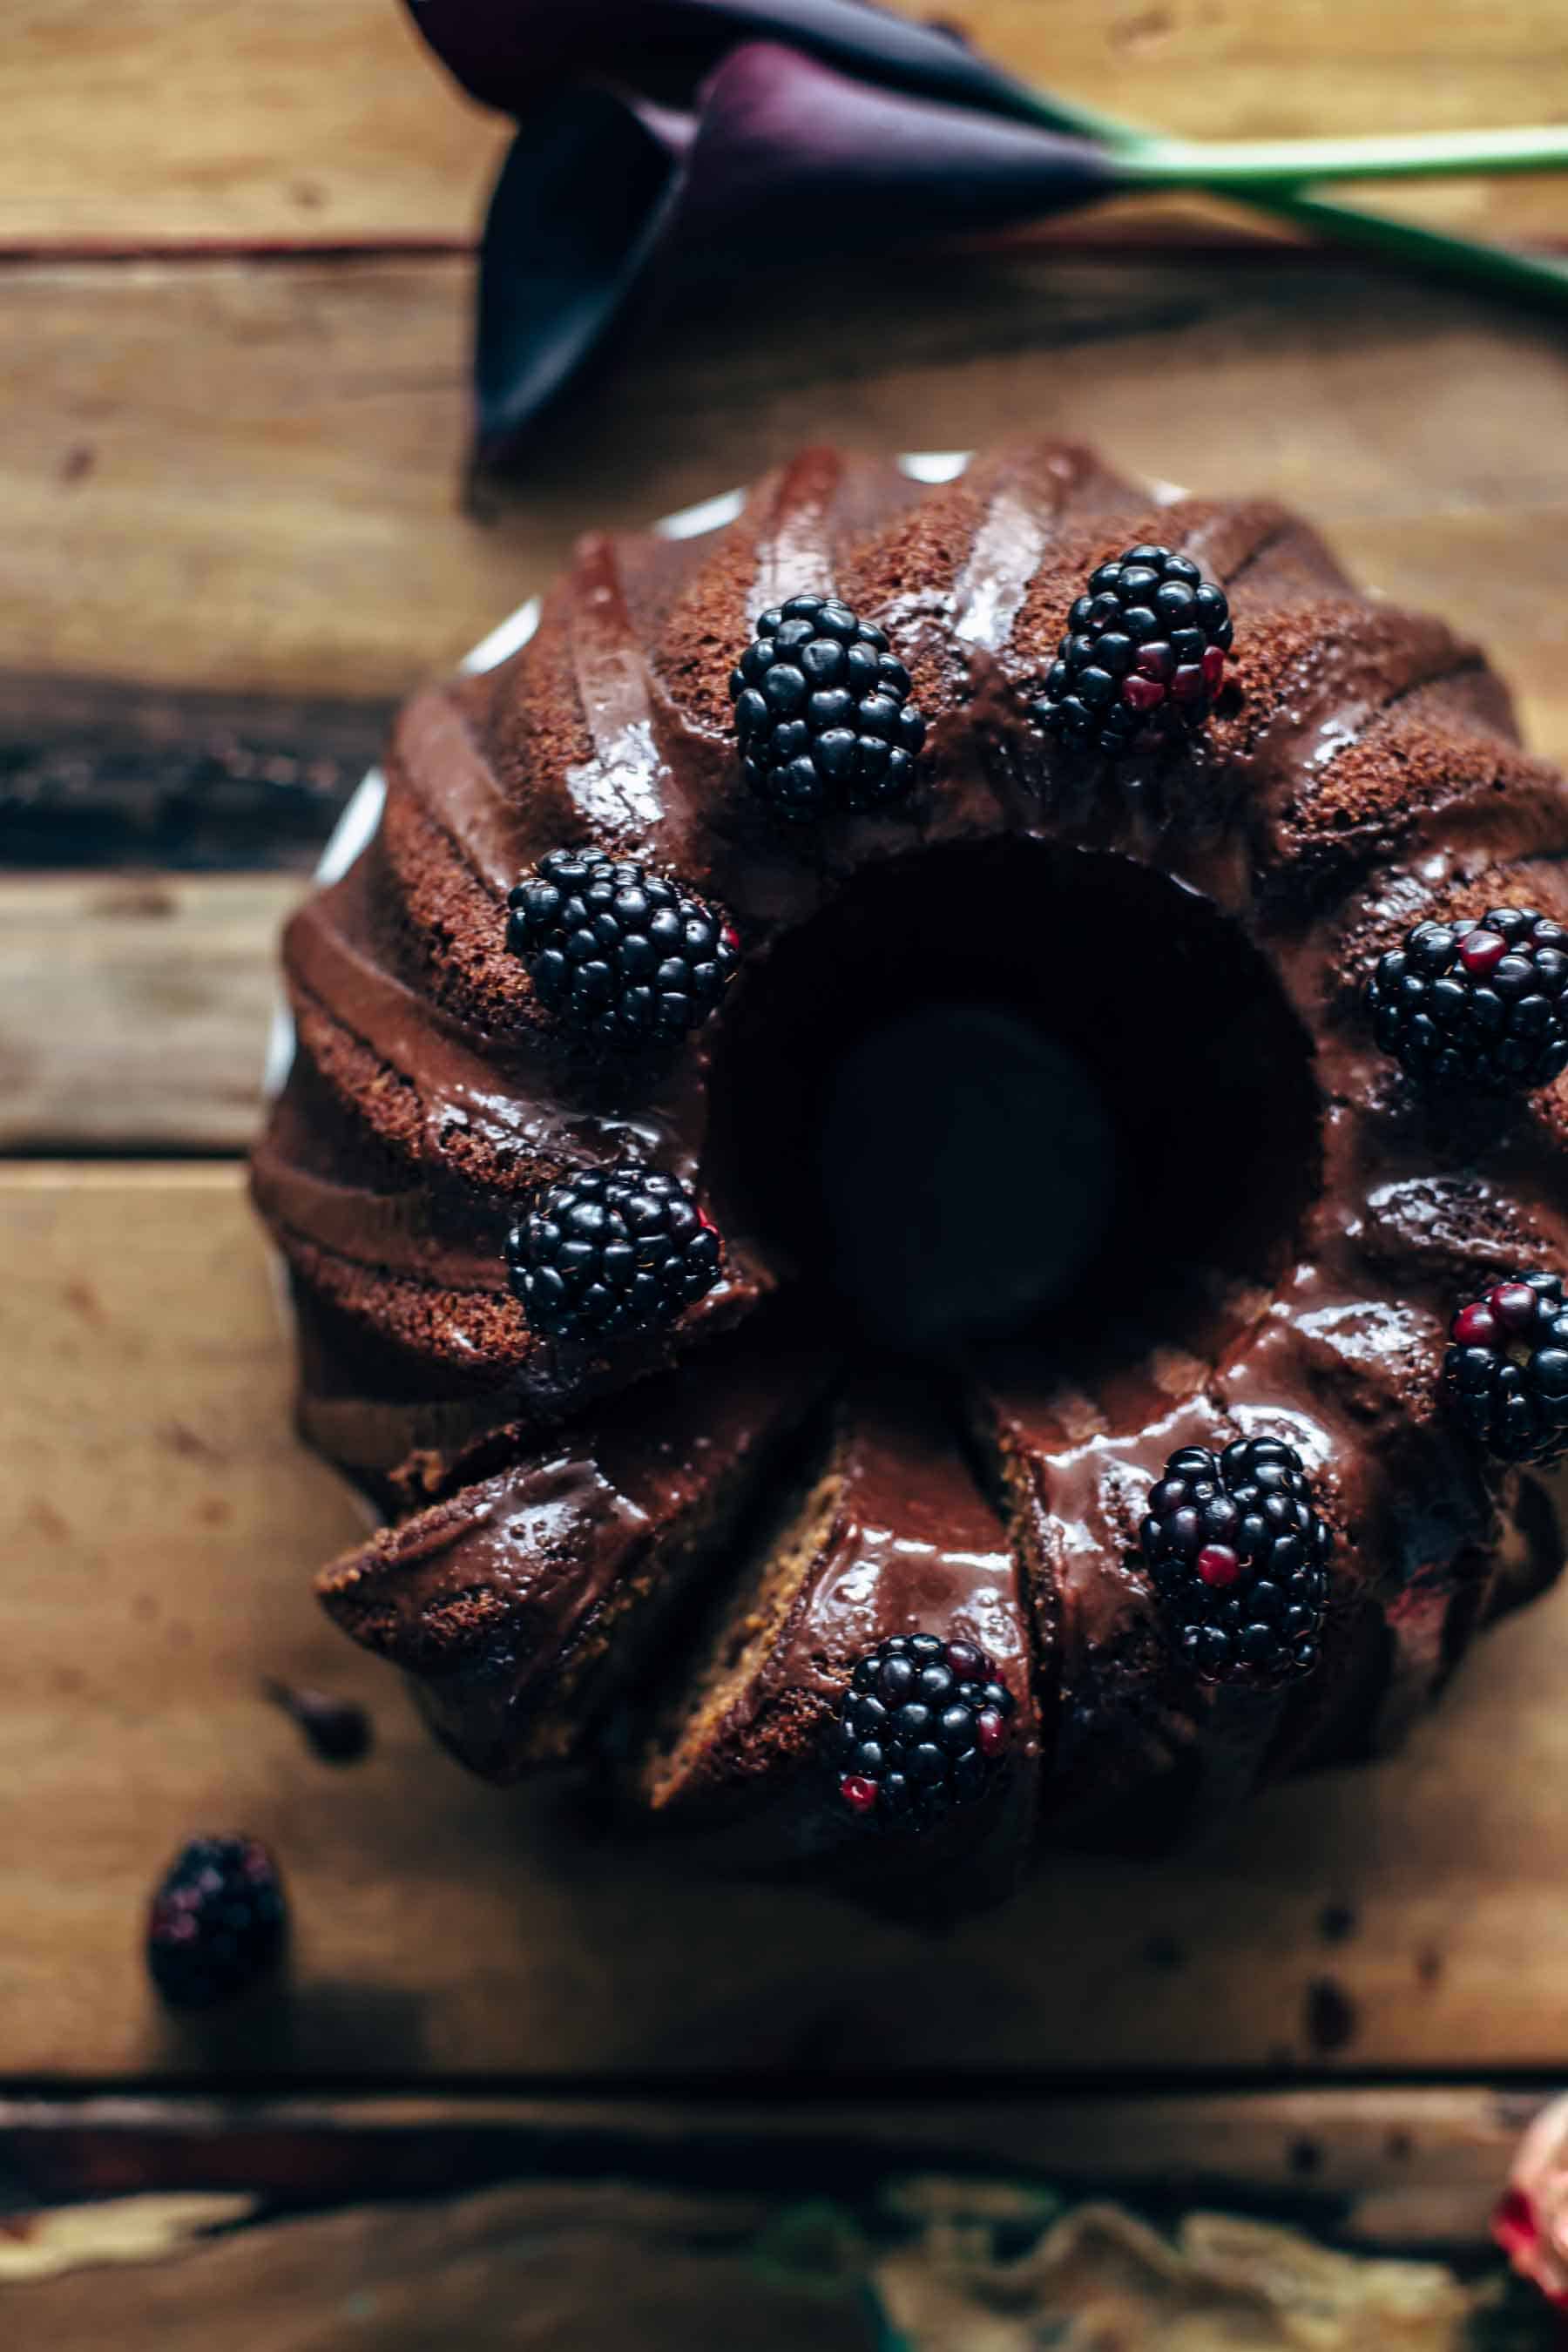 Sliced bundt cake with berries on top on a wooden table